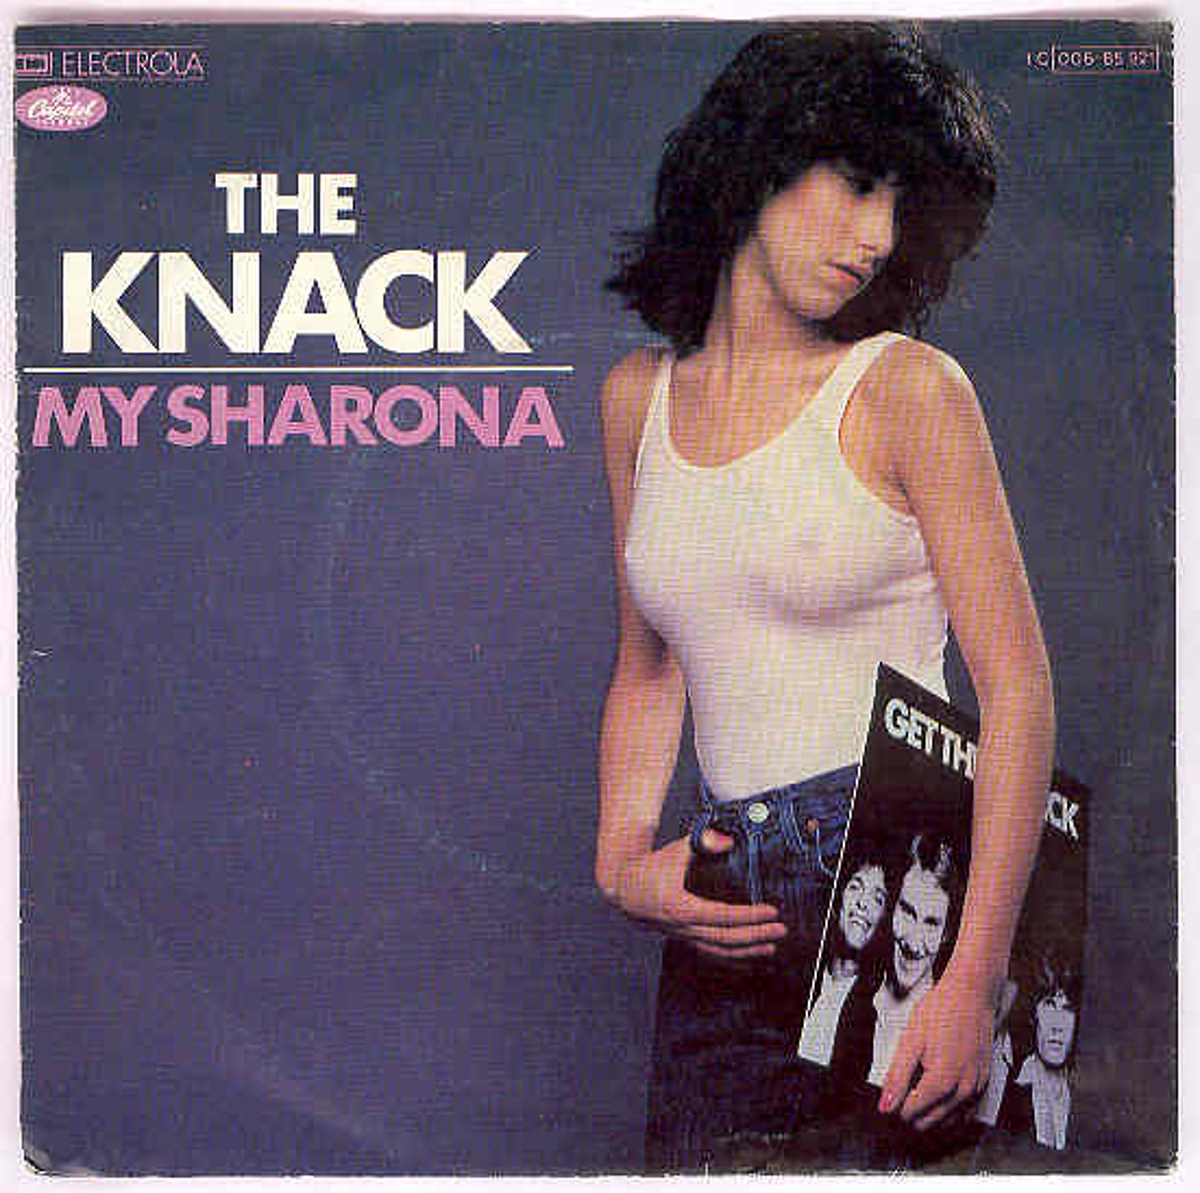 POSmusic background music streaming platform for business fitness, gyms, Pilates  playlists – The Knack - My Sharona